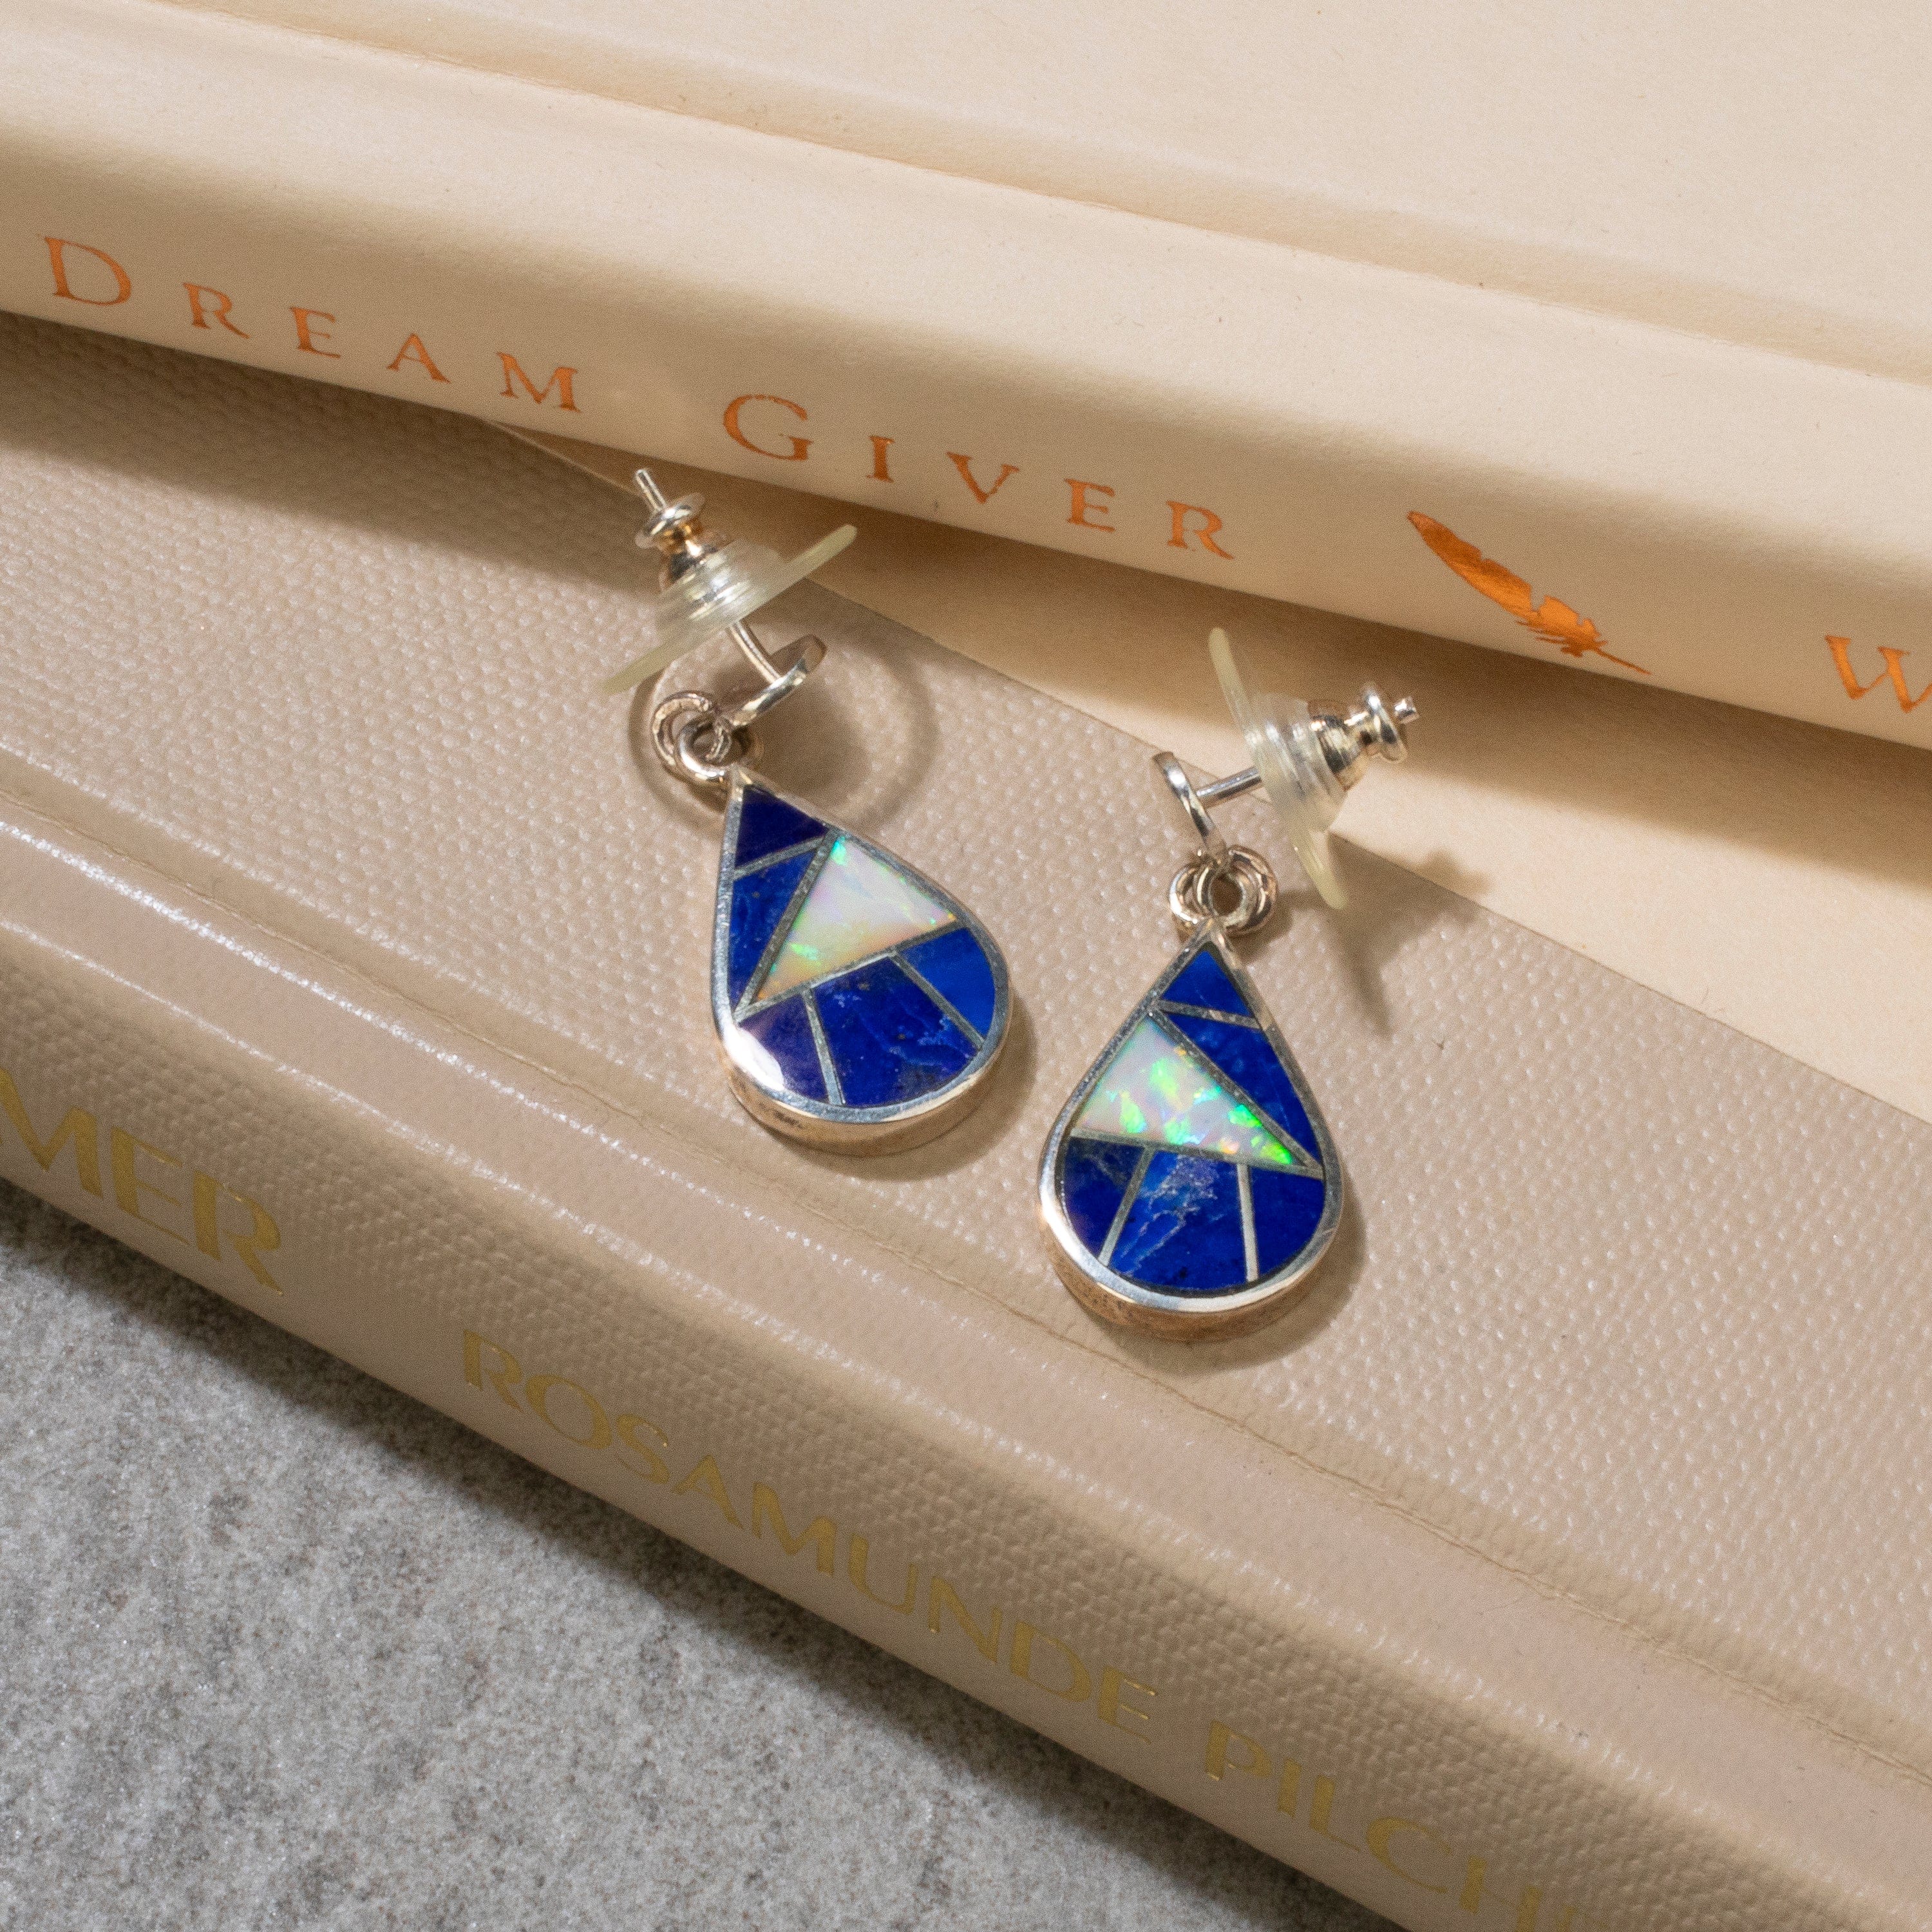 Kalifano Native American Jewelry Lapis & Opal Teardrop Navajo USA Native American Made 925 Sterling Silver Earrings with Stud Backing NAE400.037